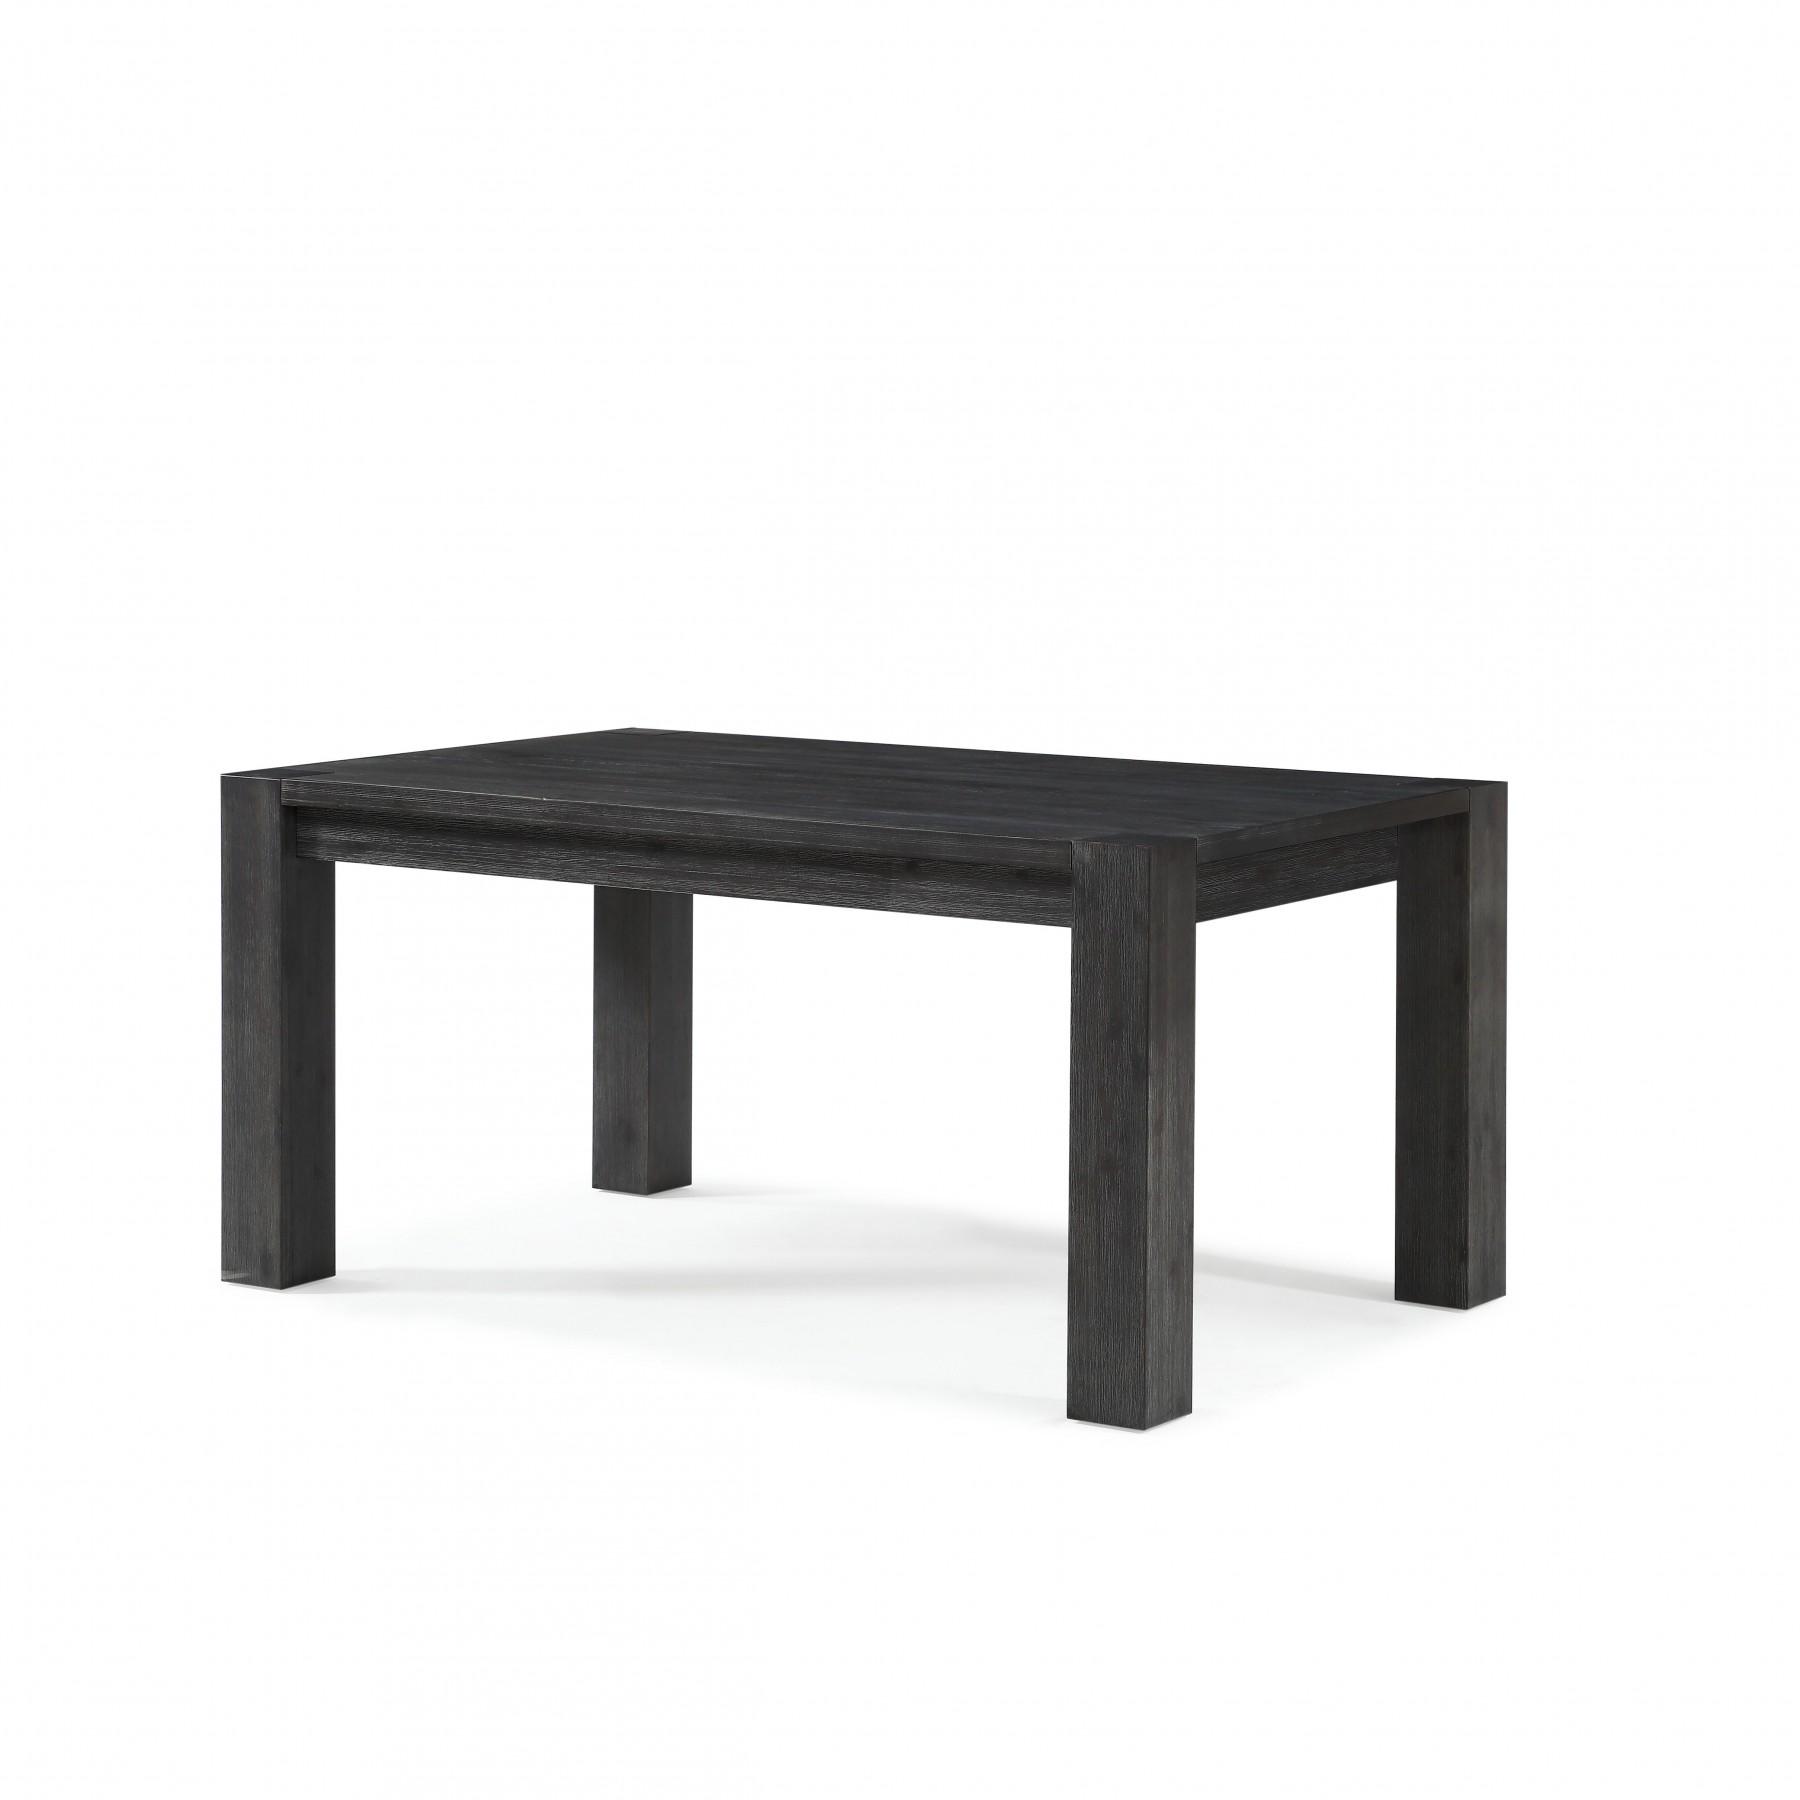 Rustic Dining Table MEADOW 3FT361 in Graphite 